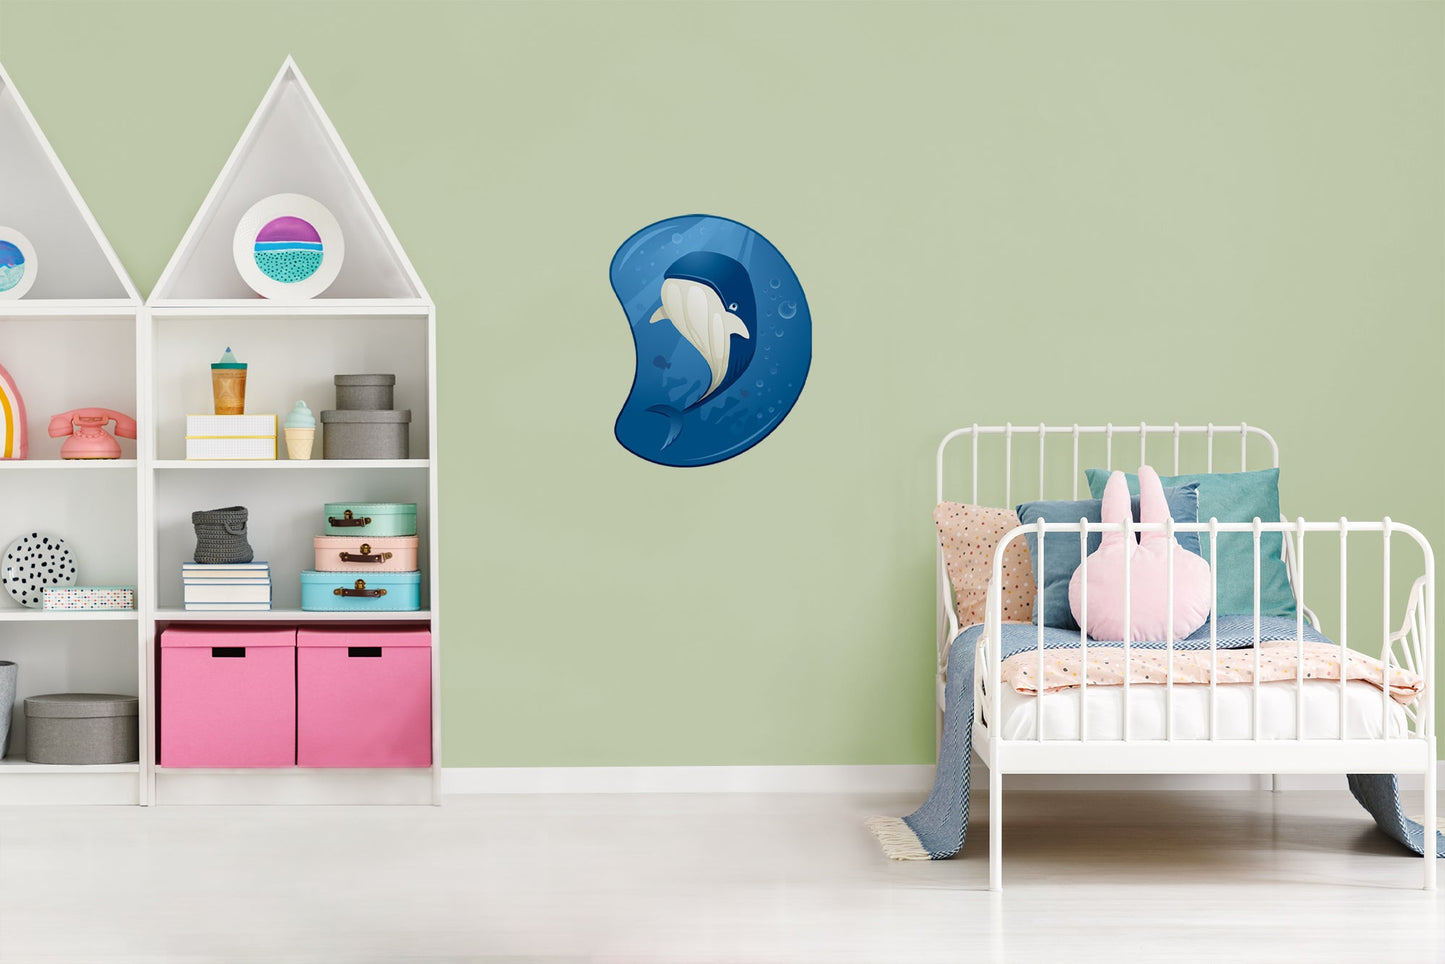 Nursery:  Whale Icon        -   Removable Wall   Adhesive Decal